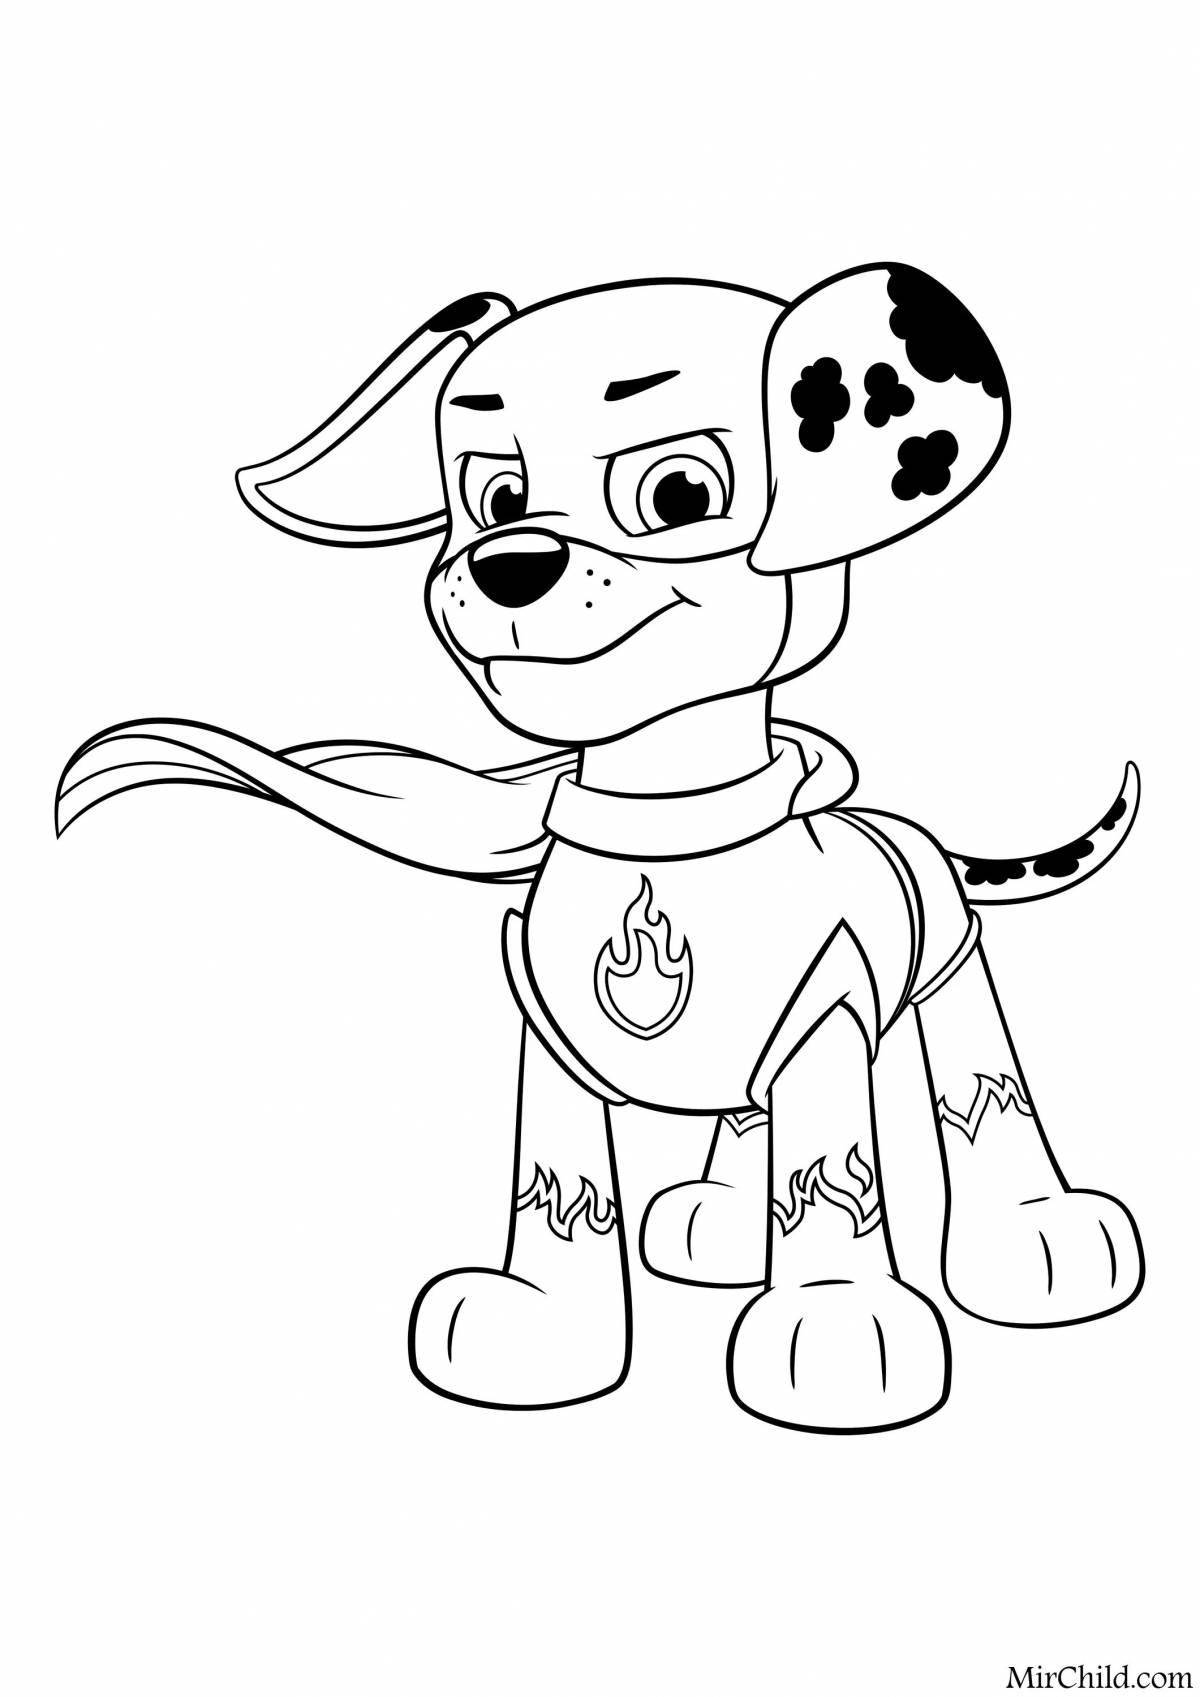 Paw Patrol colorful coloring page